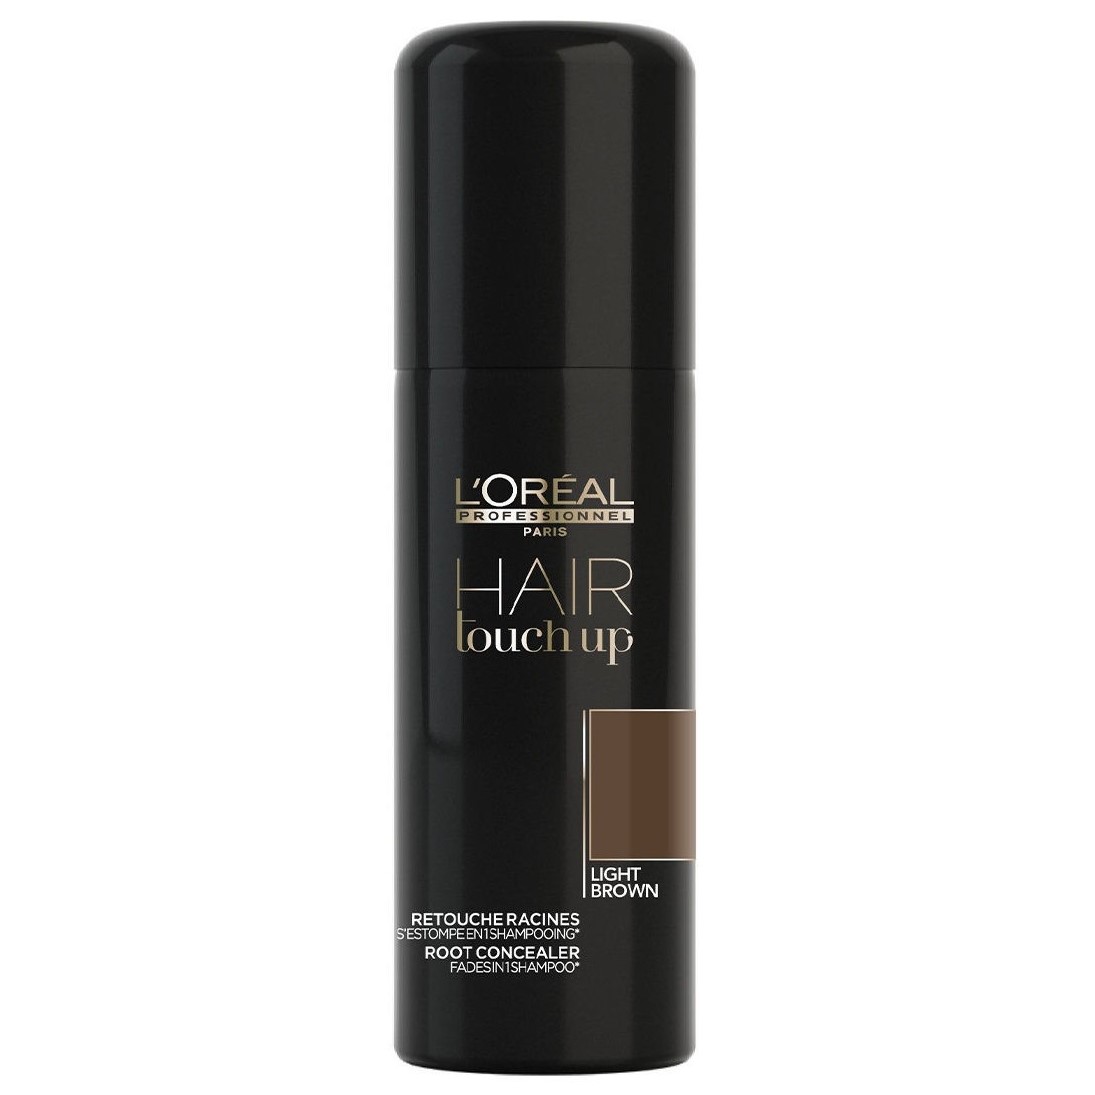 L'OREAL, Консилер для волос Hair Touch Up Light Brown, 75 мл.